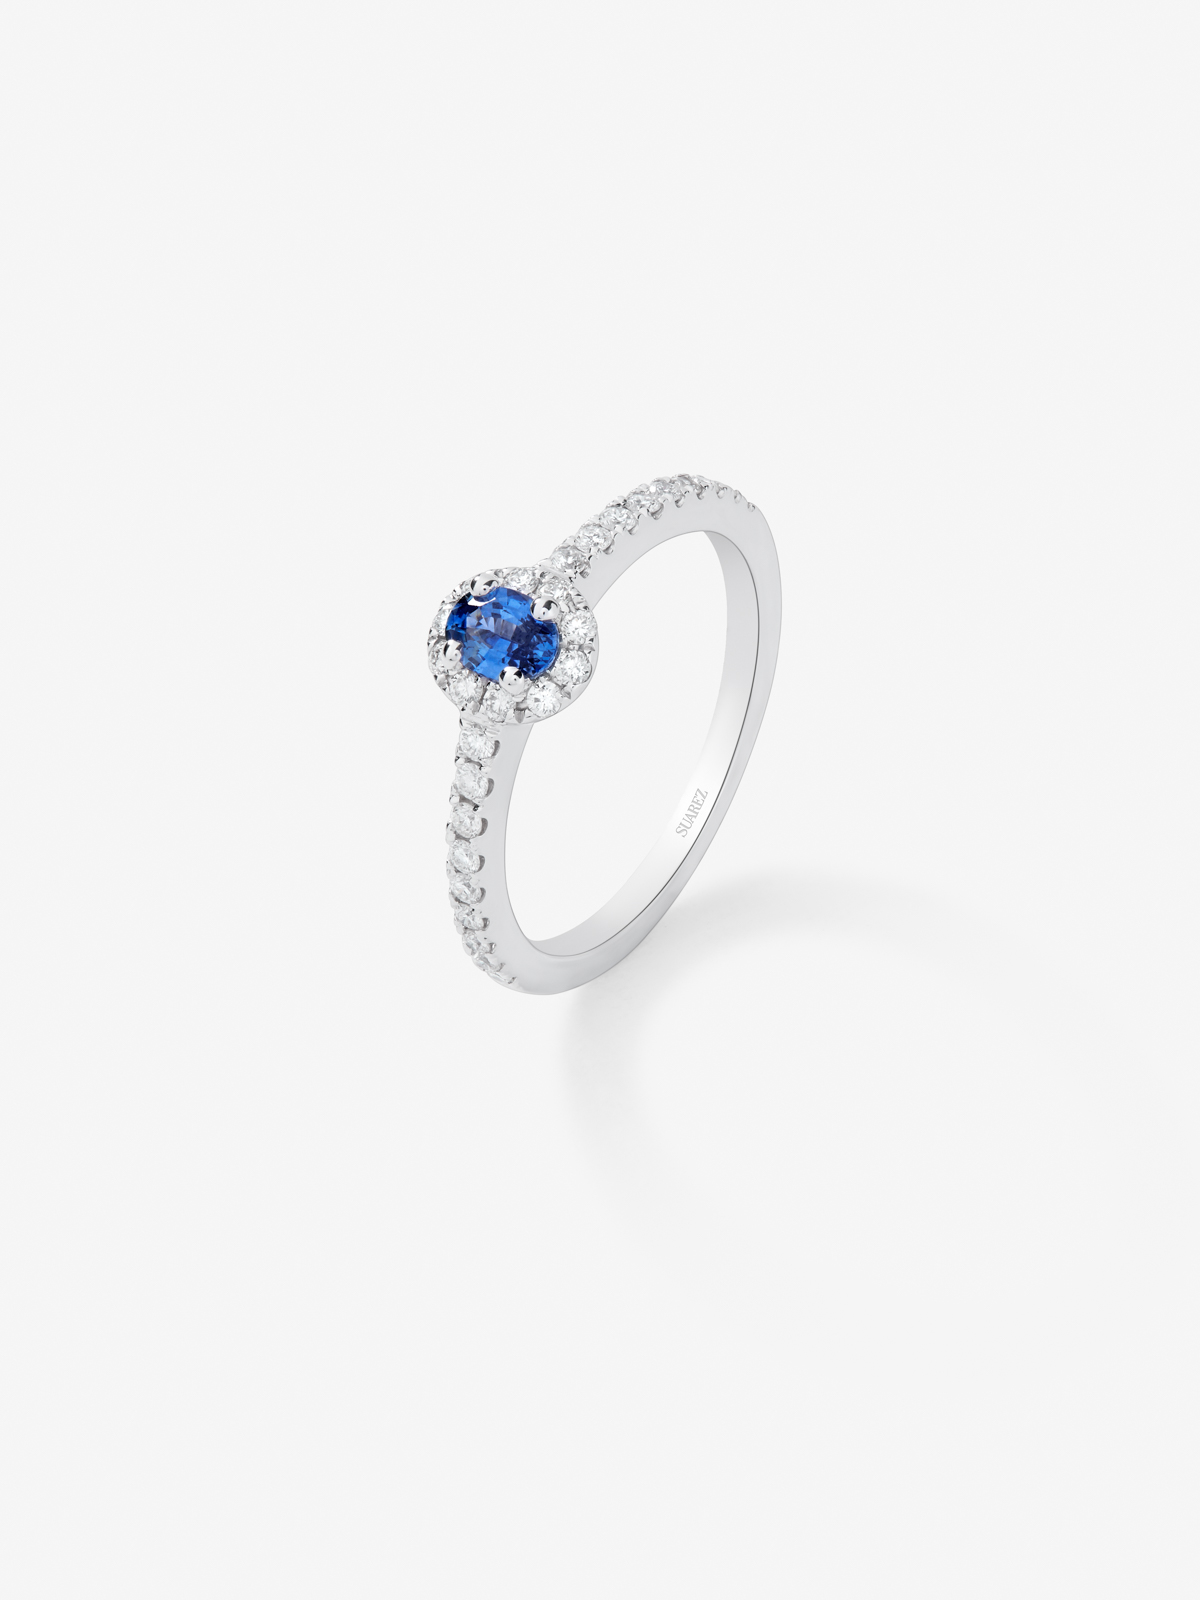 18K white gold ring with 0.32 ct oval-cut blue sapphire and 0.25 ct brilliant-cut white diamonds